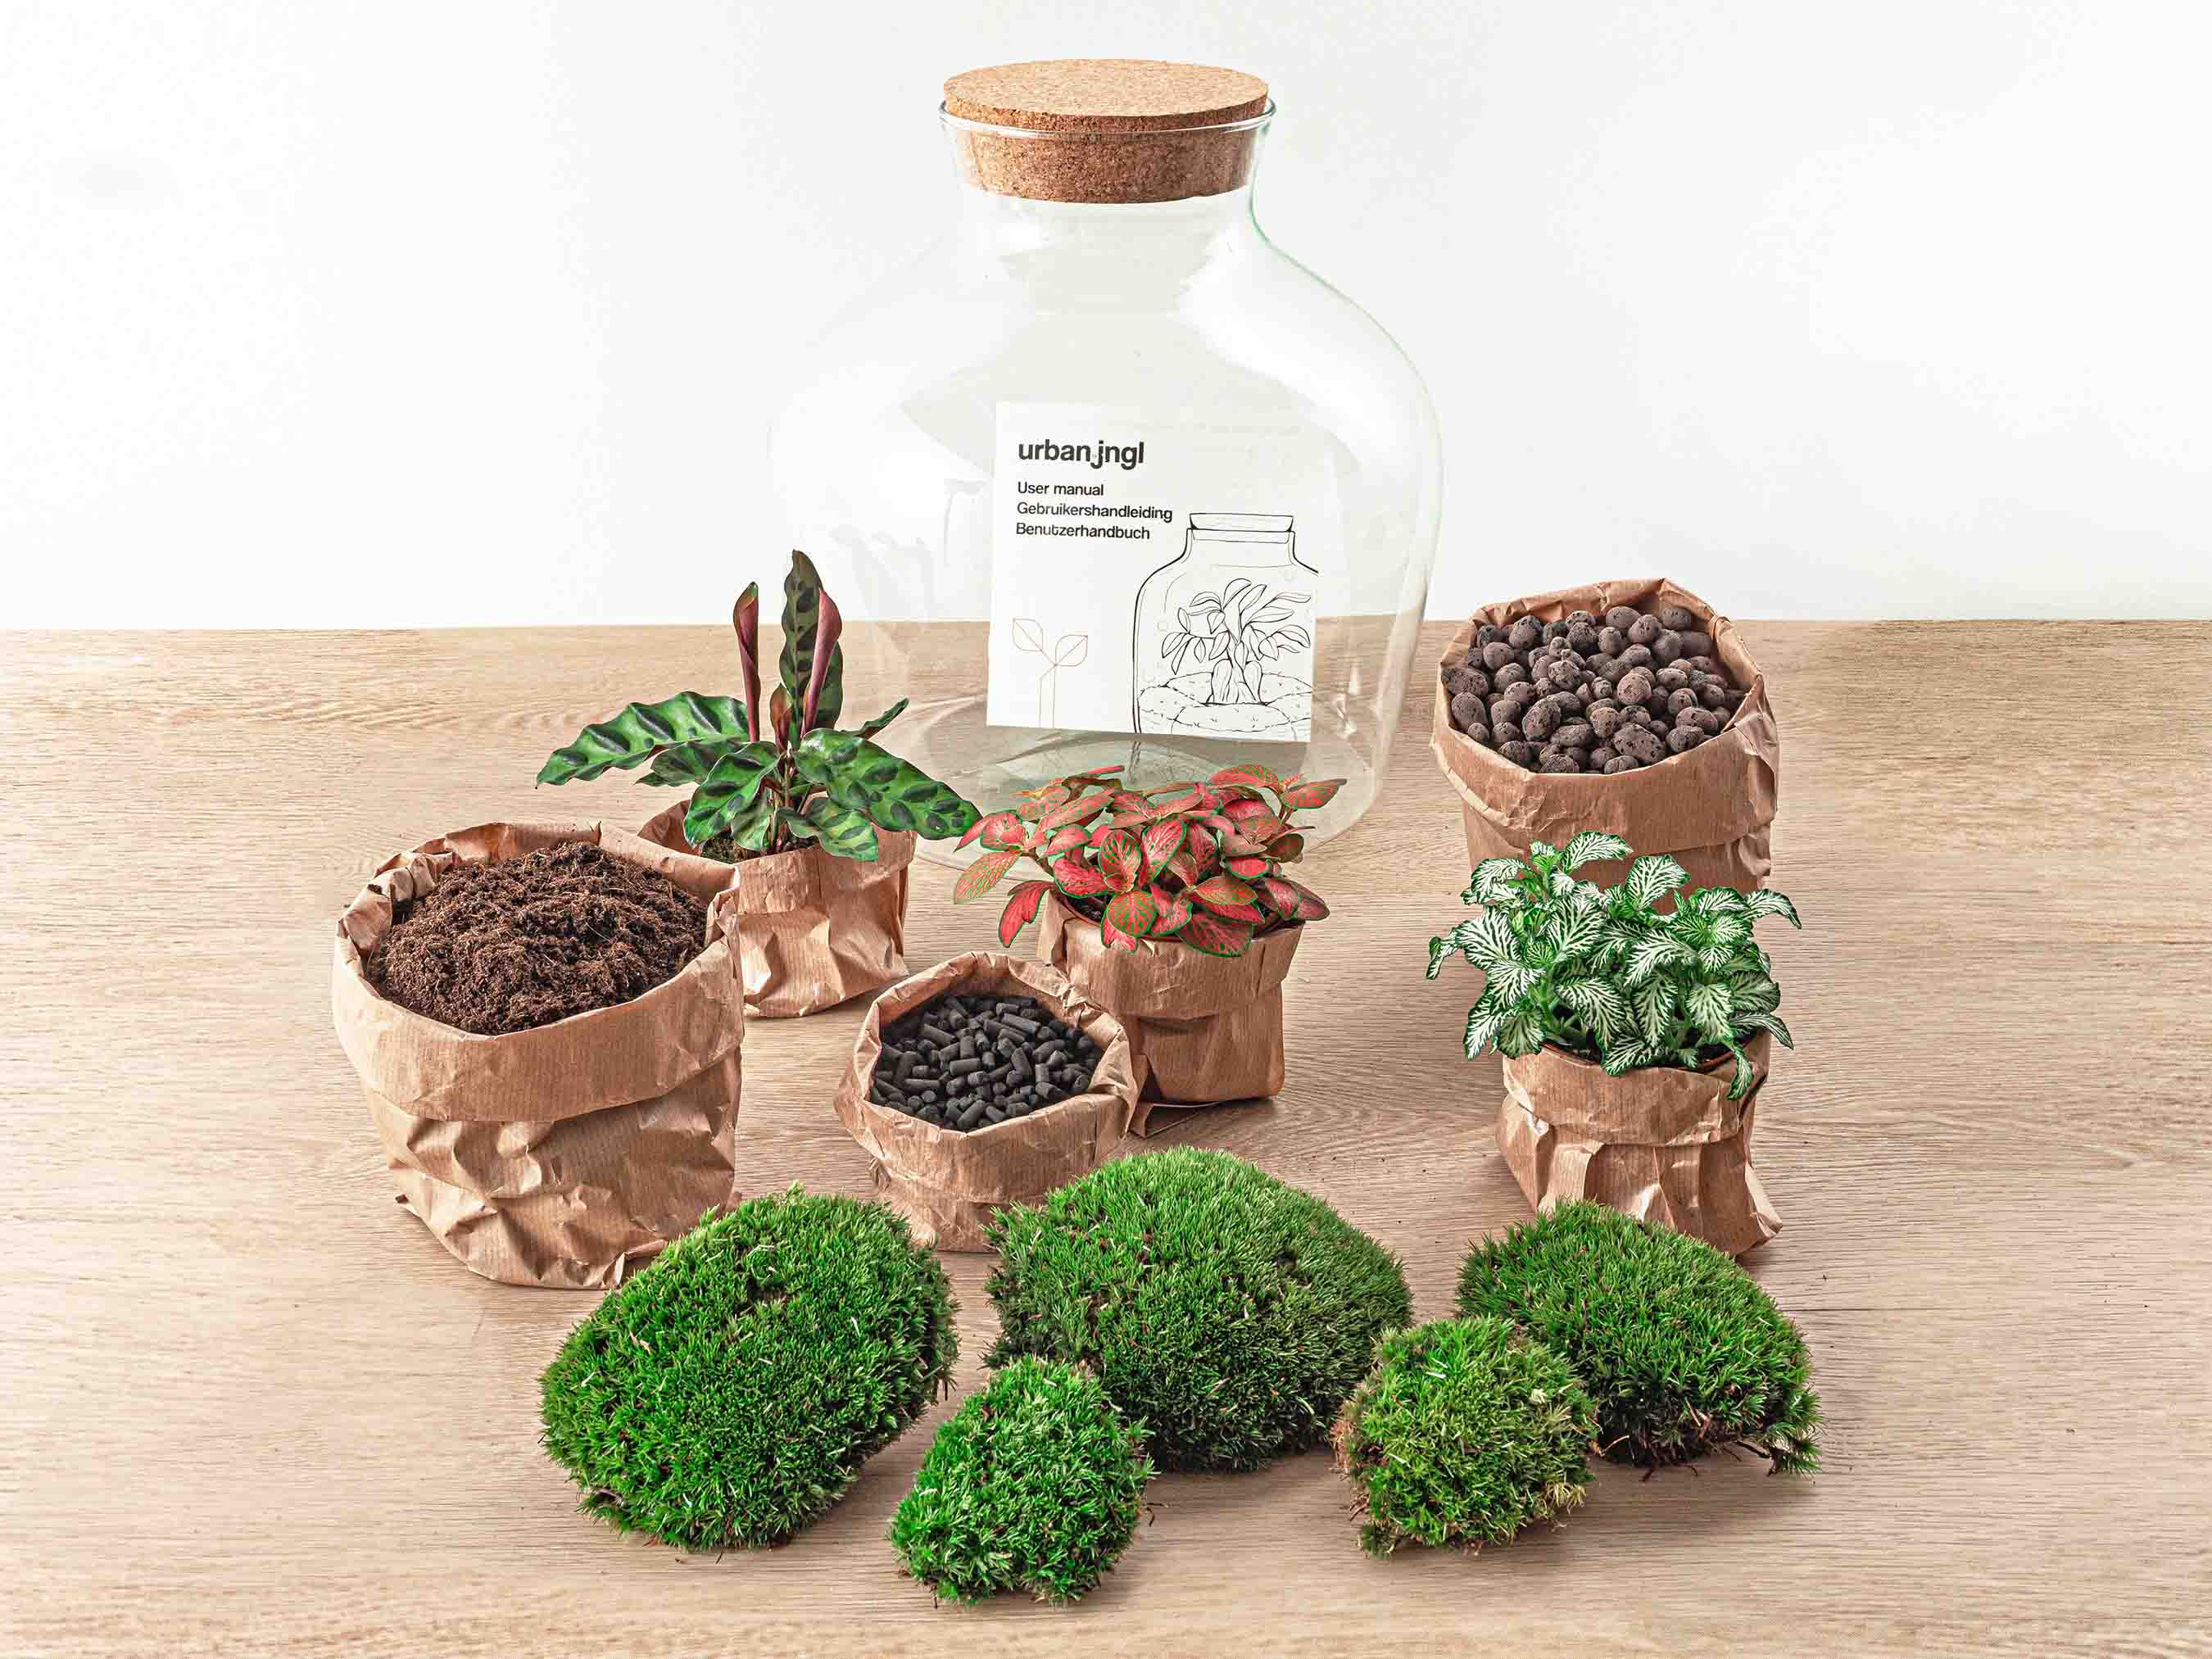 THE Kit DIY Terrarium Kit All You Need is the Container 